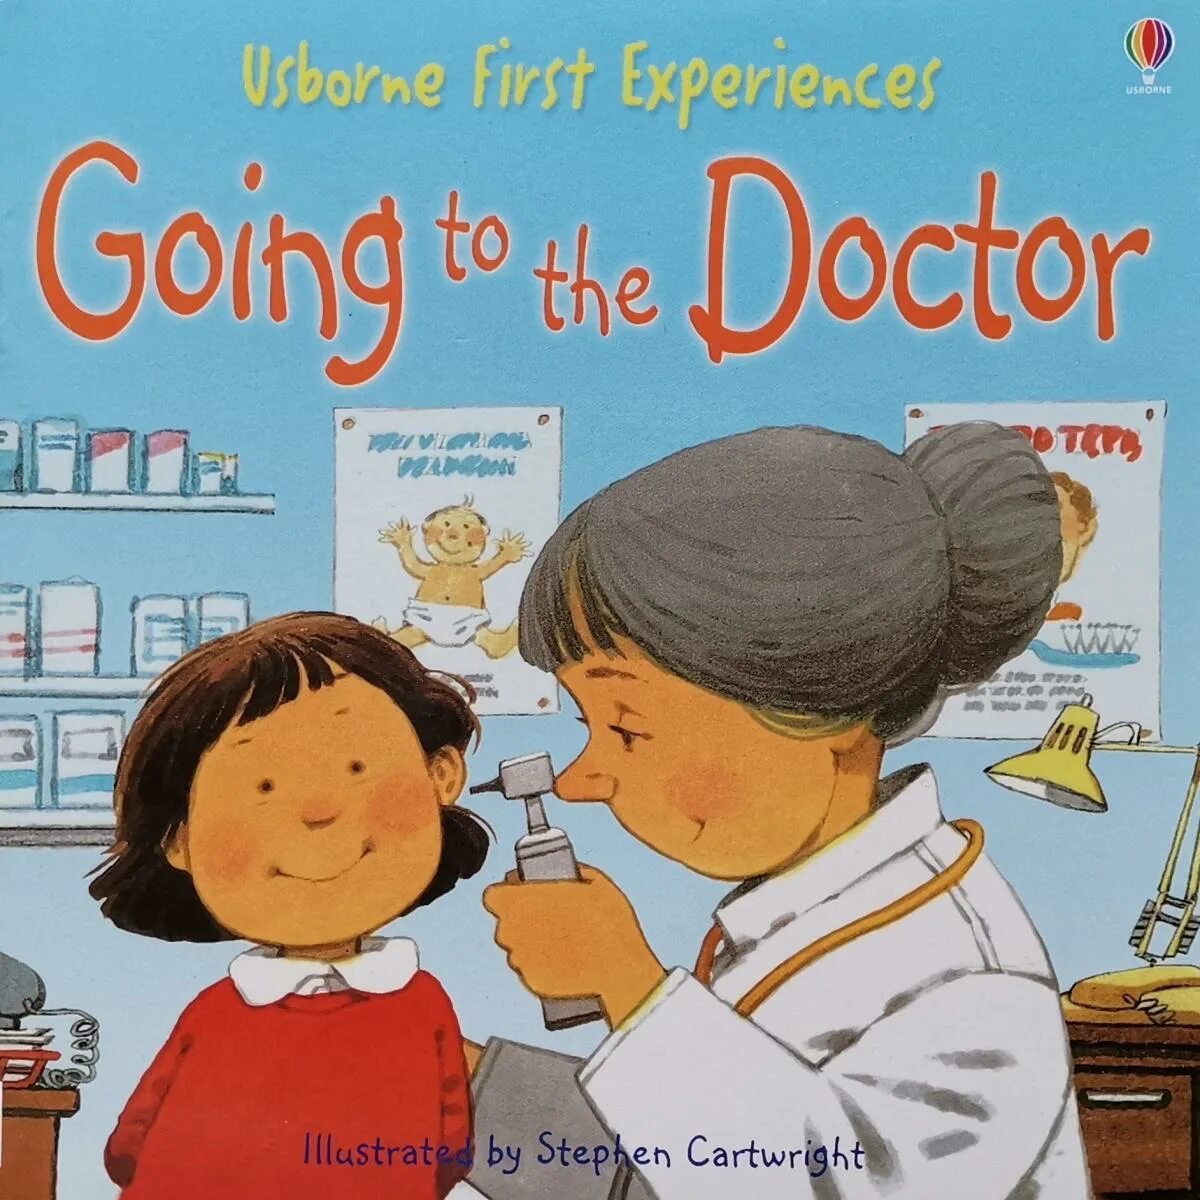 1 going experience. Civardi Anne "the New Baby". Go to the Doctor. Civardi Anna "going to Doctor".